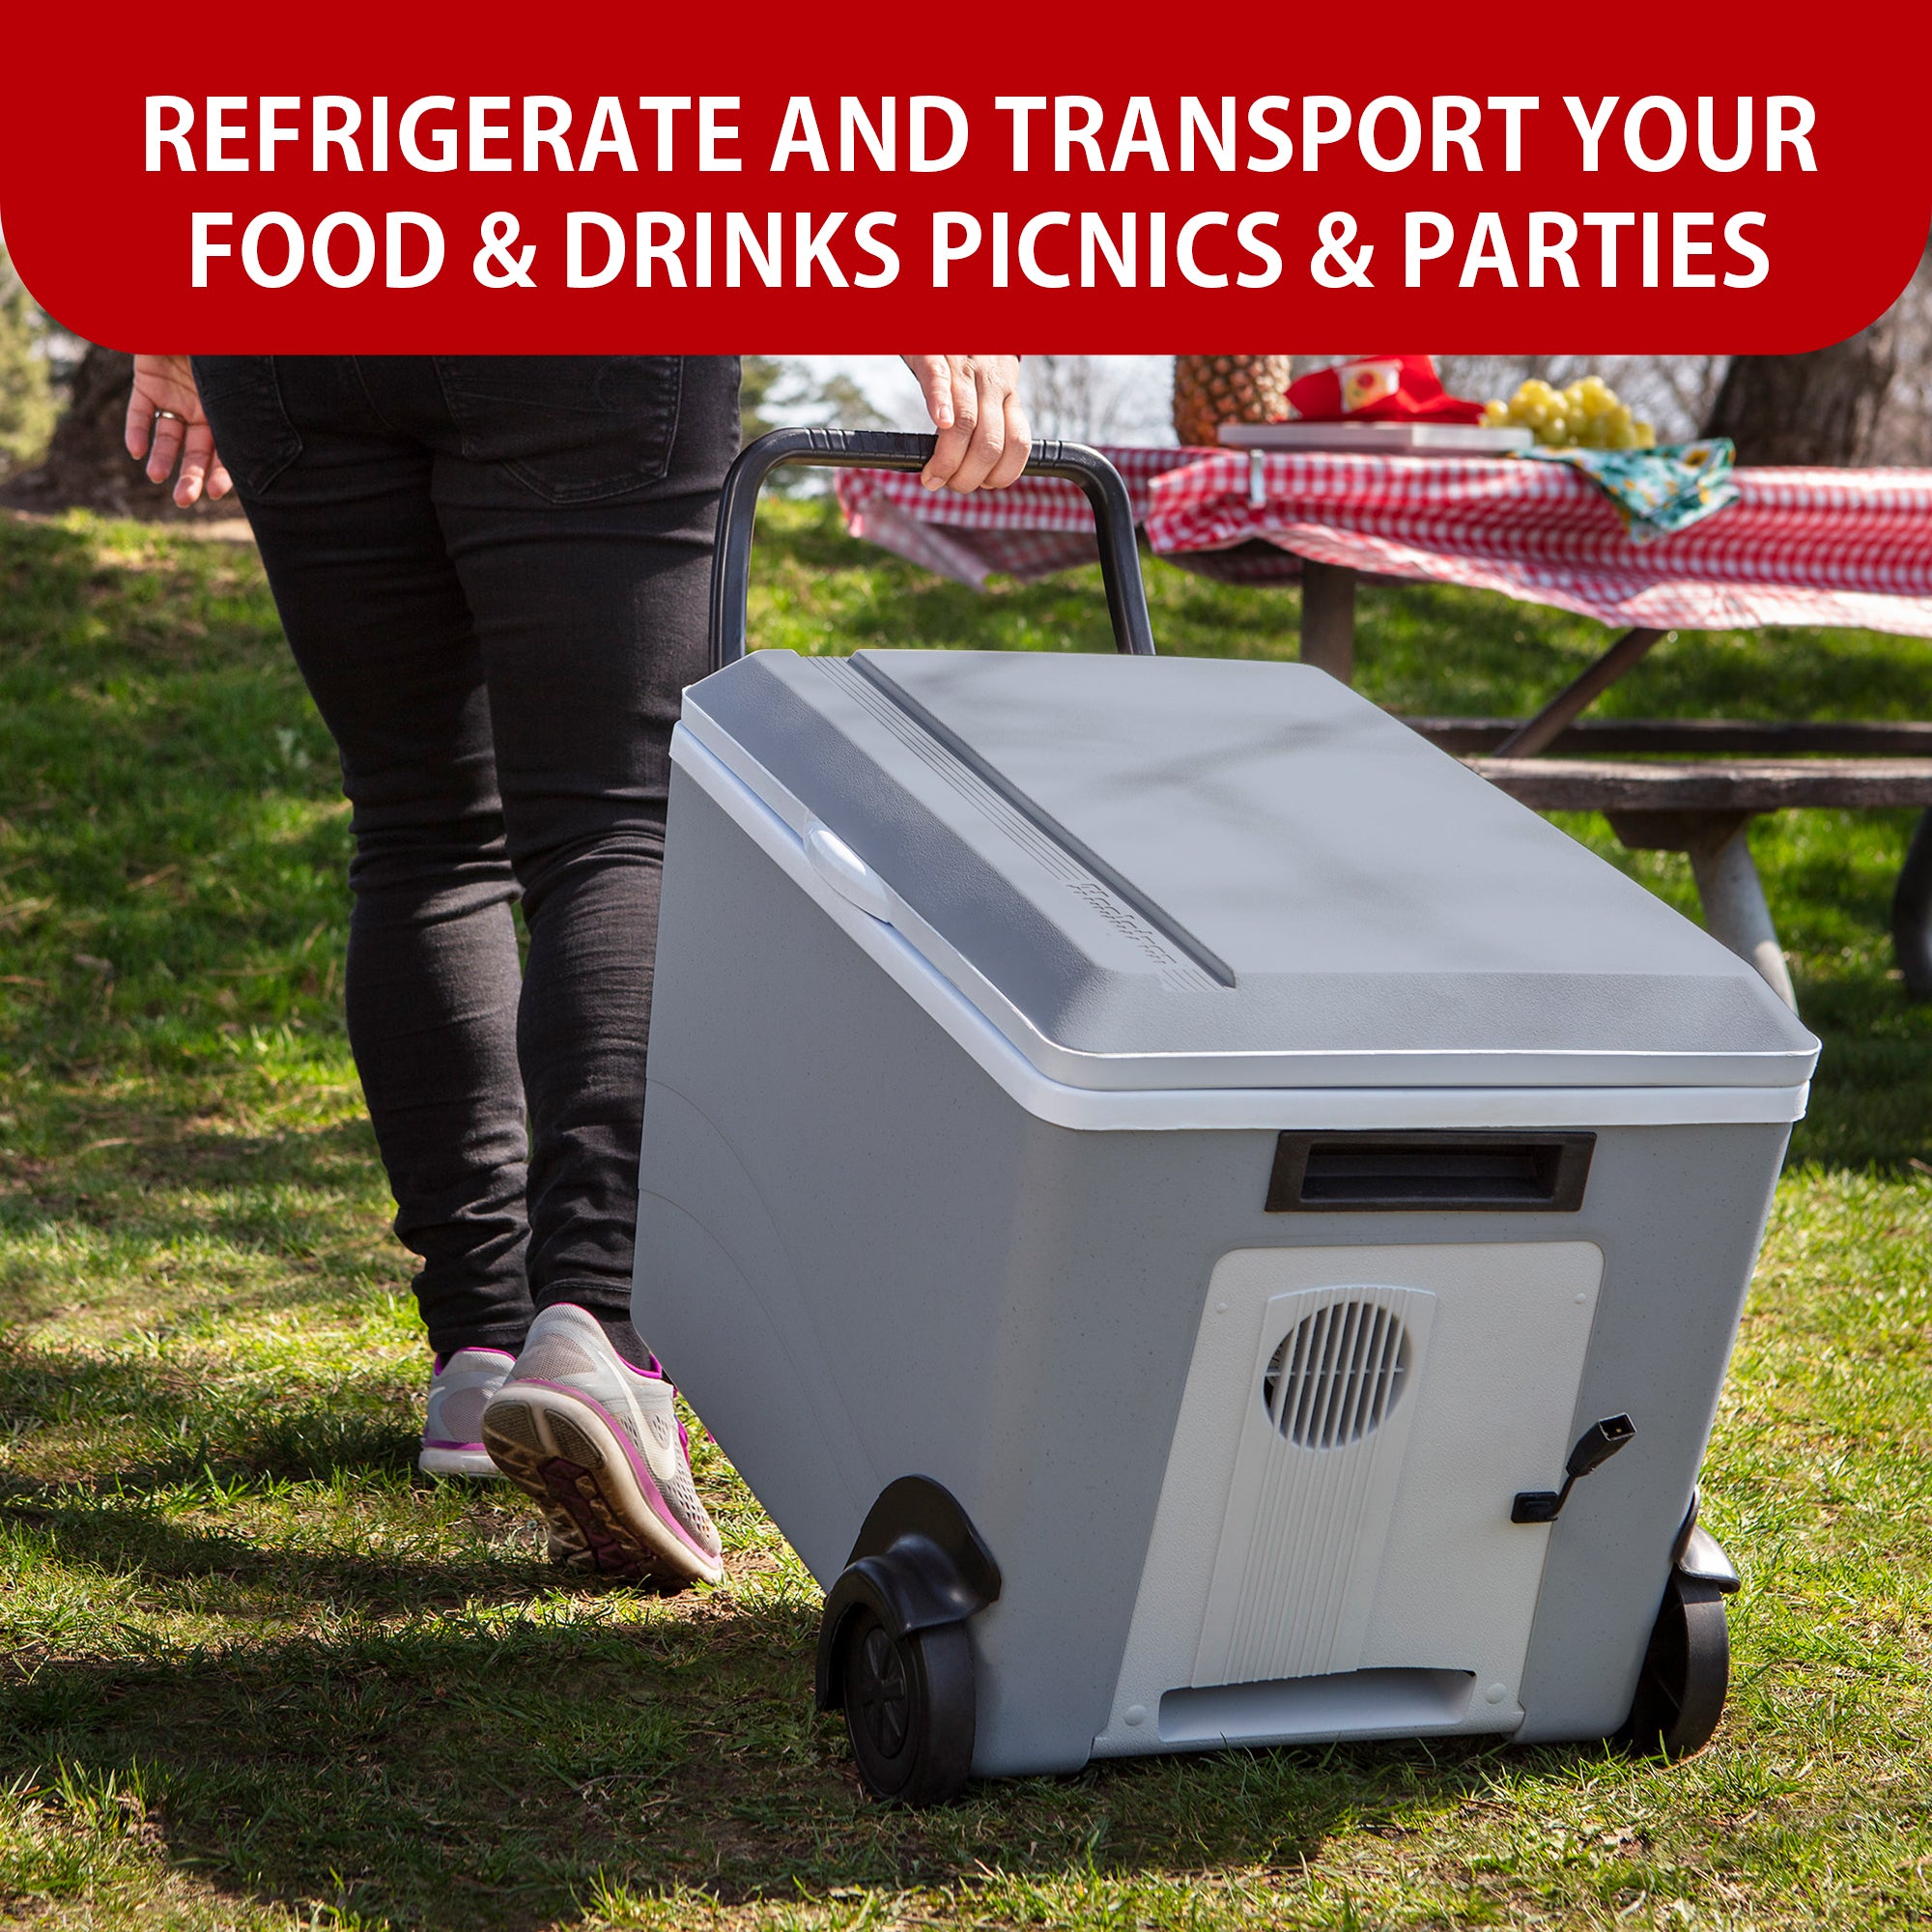 A person wearing black pants and gray and pink running shoes is towing the Koolatron rolling 12V cooler/warmer on grass towards a picnic table with a red and white checked tablecloth. Text above reads, "REFRIGERATE AND TRANSPORT FOOD AND DRINKS TO PICNICS AND PARTIES"